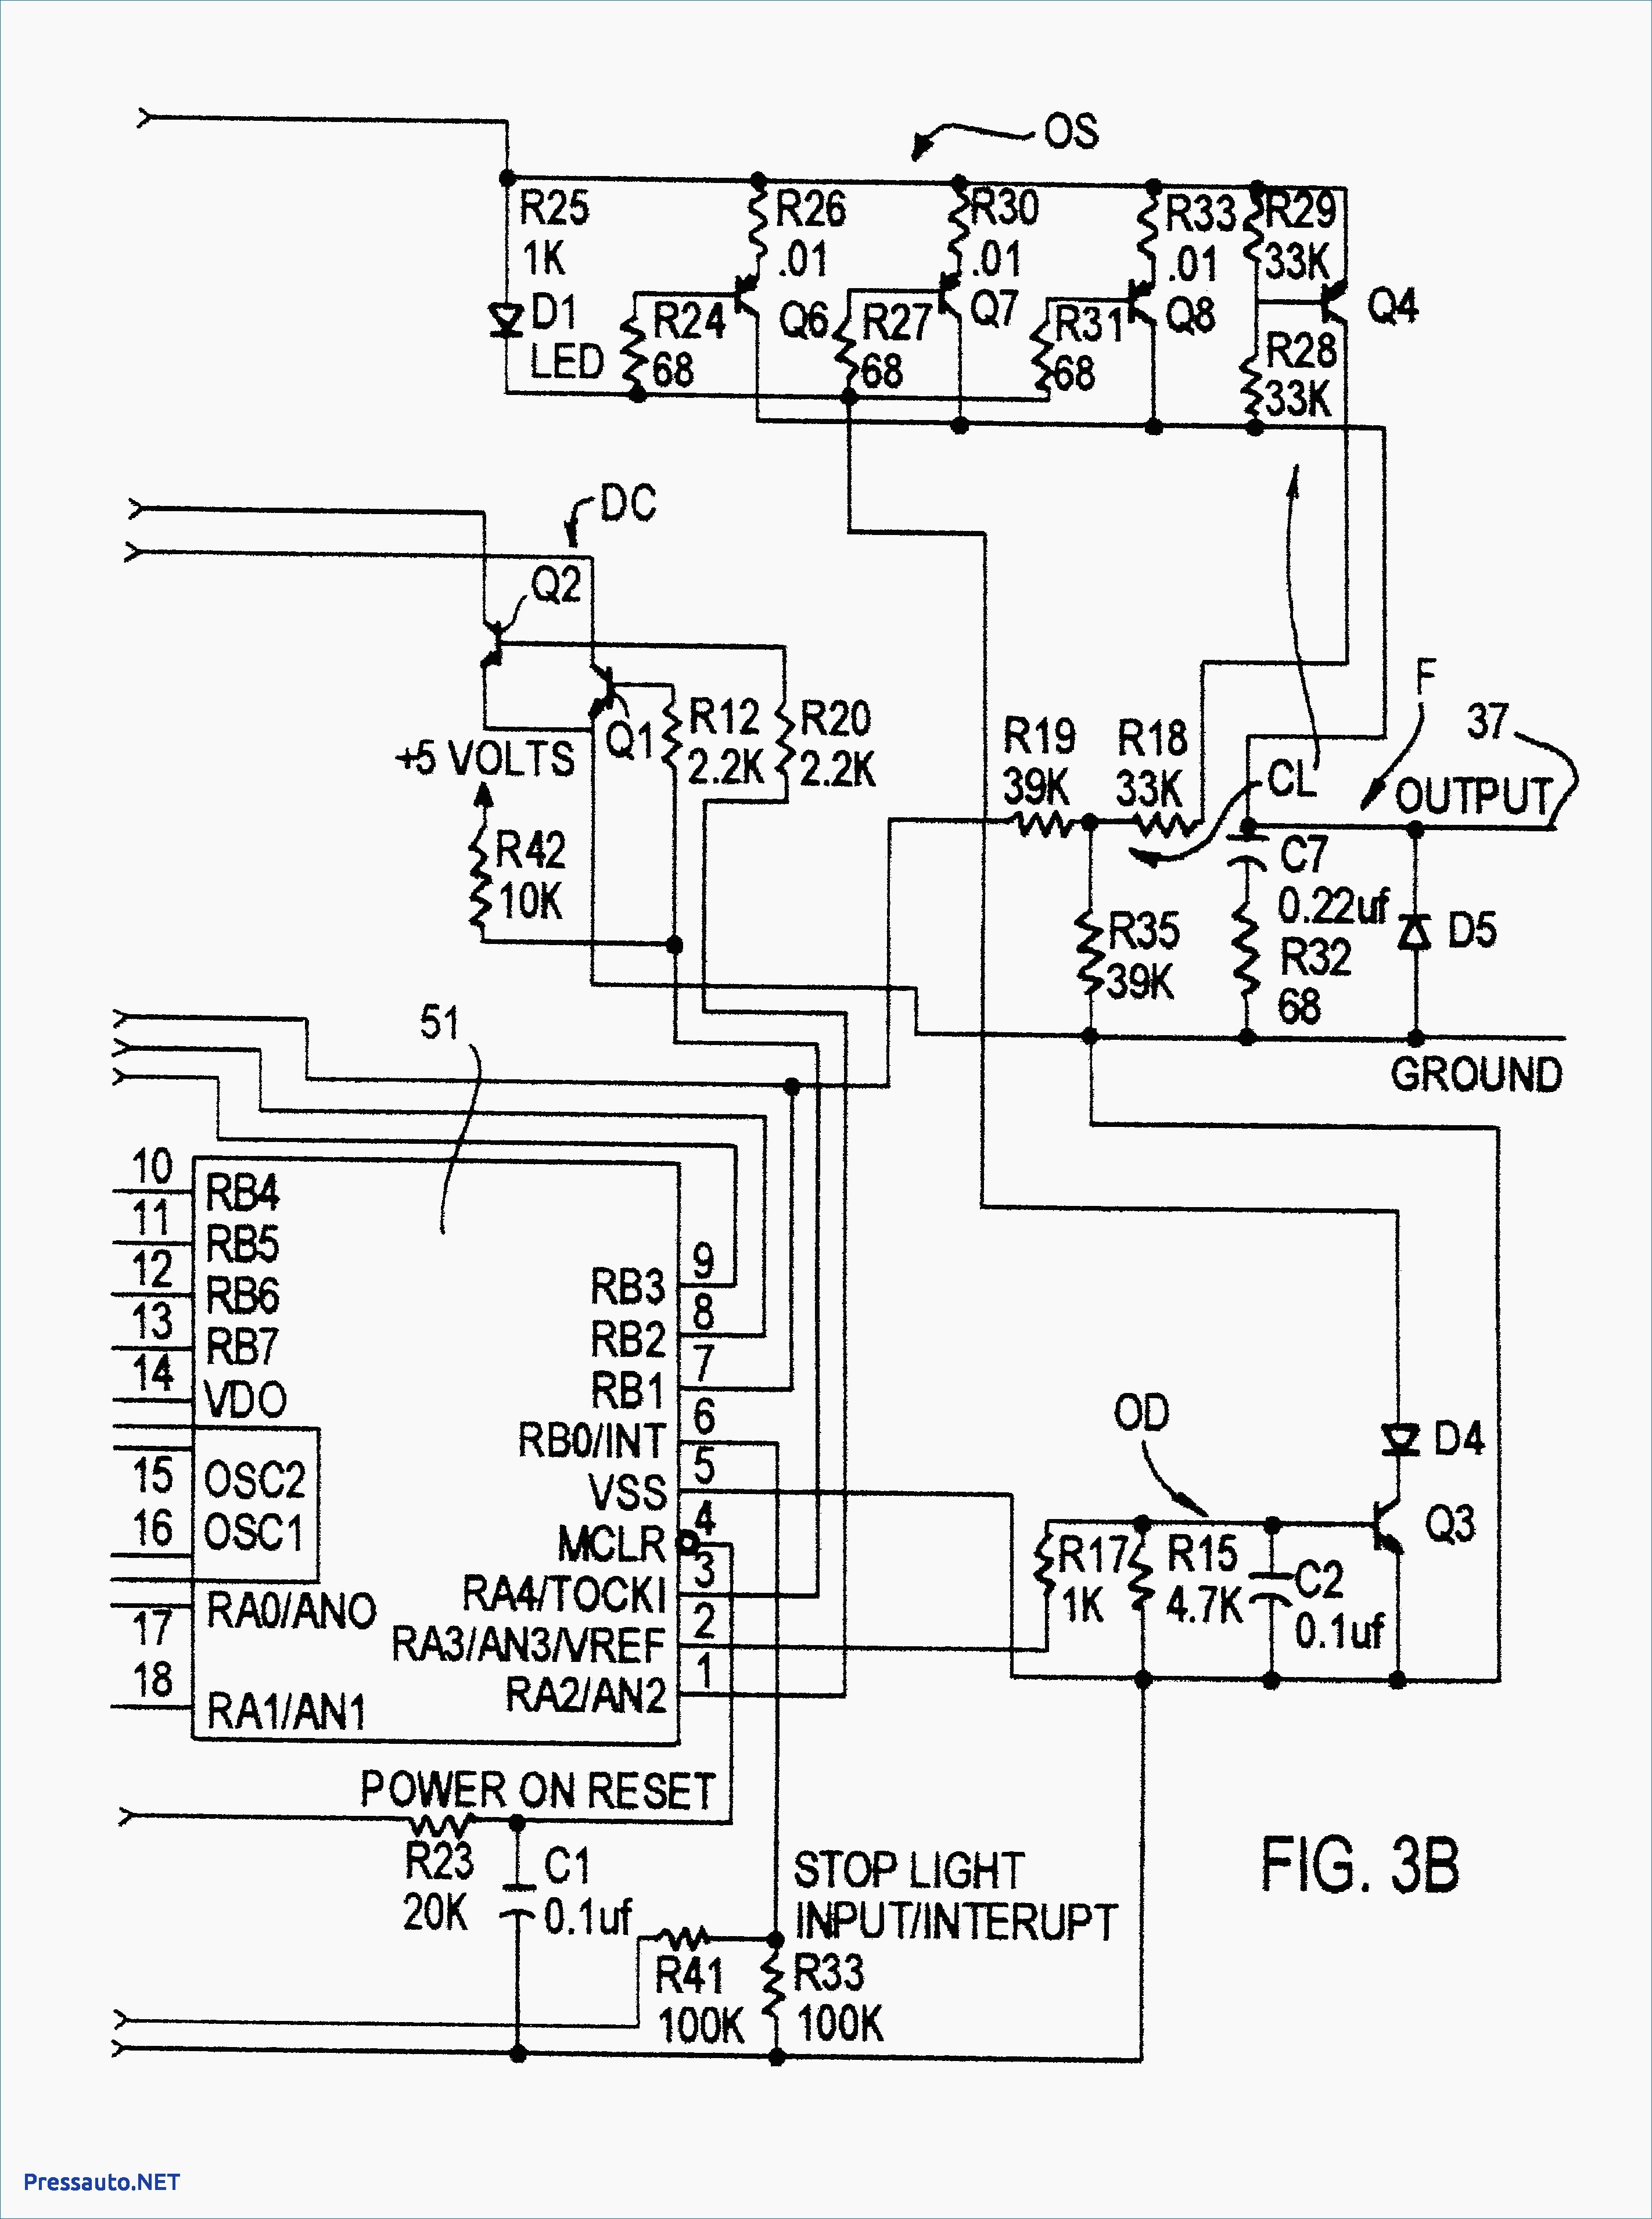 Wiring Diagram Electric Trailer Brake Control With Brakes Fit 2844 2C3820 Ssl 1 And